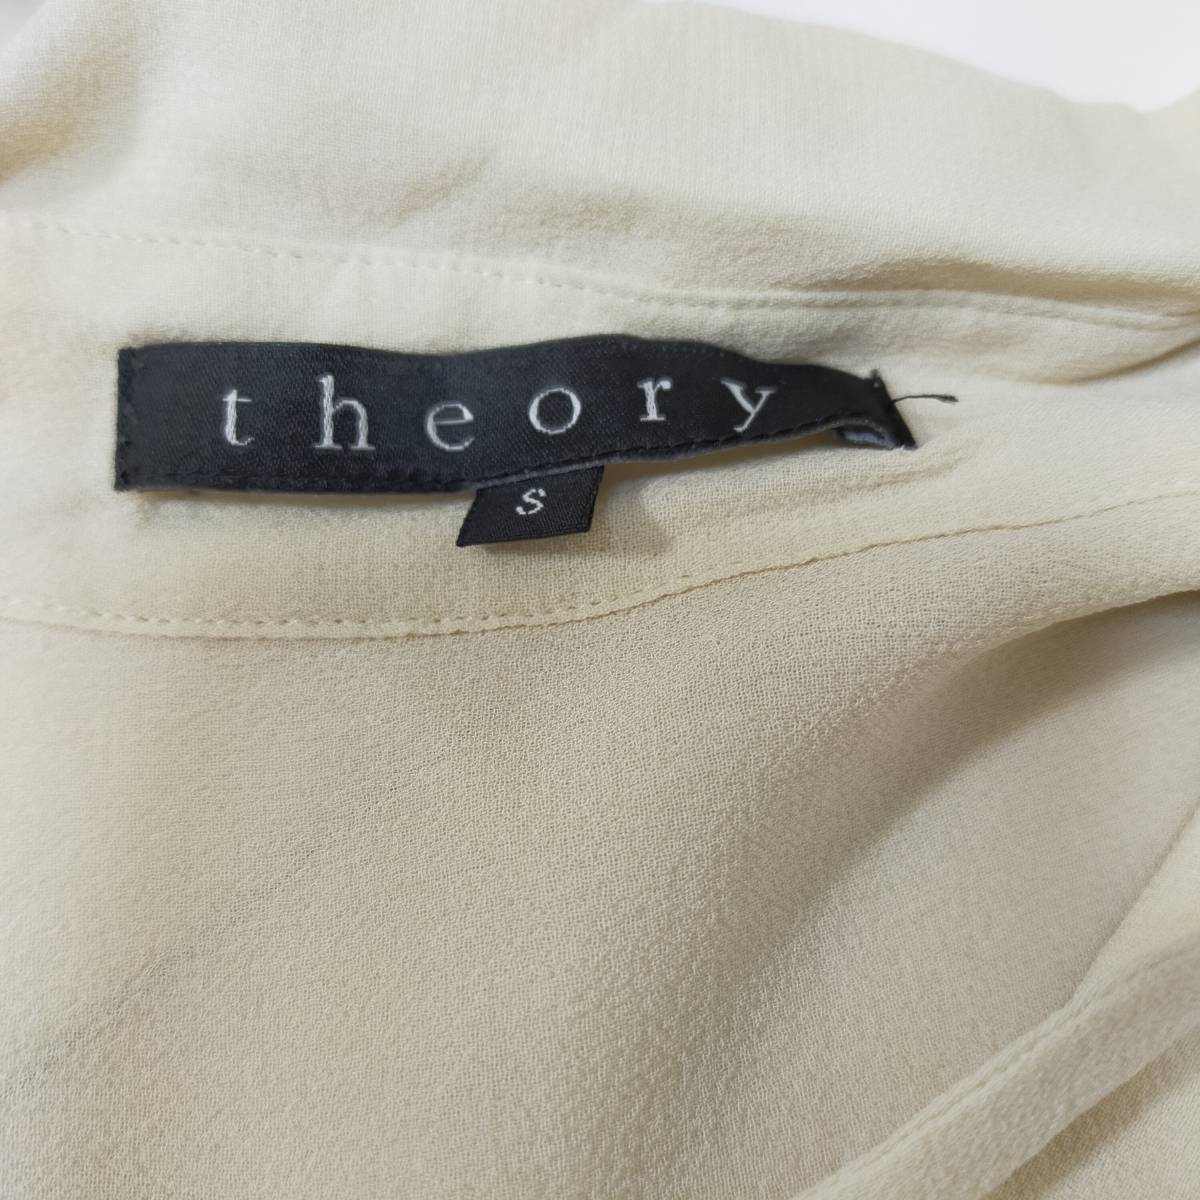  translation have theory thoey made in Japan sia- shirt size Skinali white silk 100% see-through ... long sleeve shirt feather woven side damage 3160